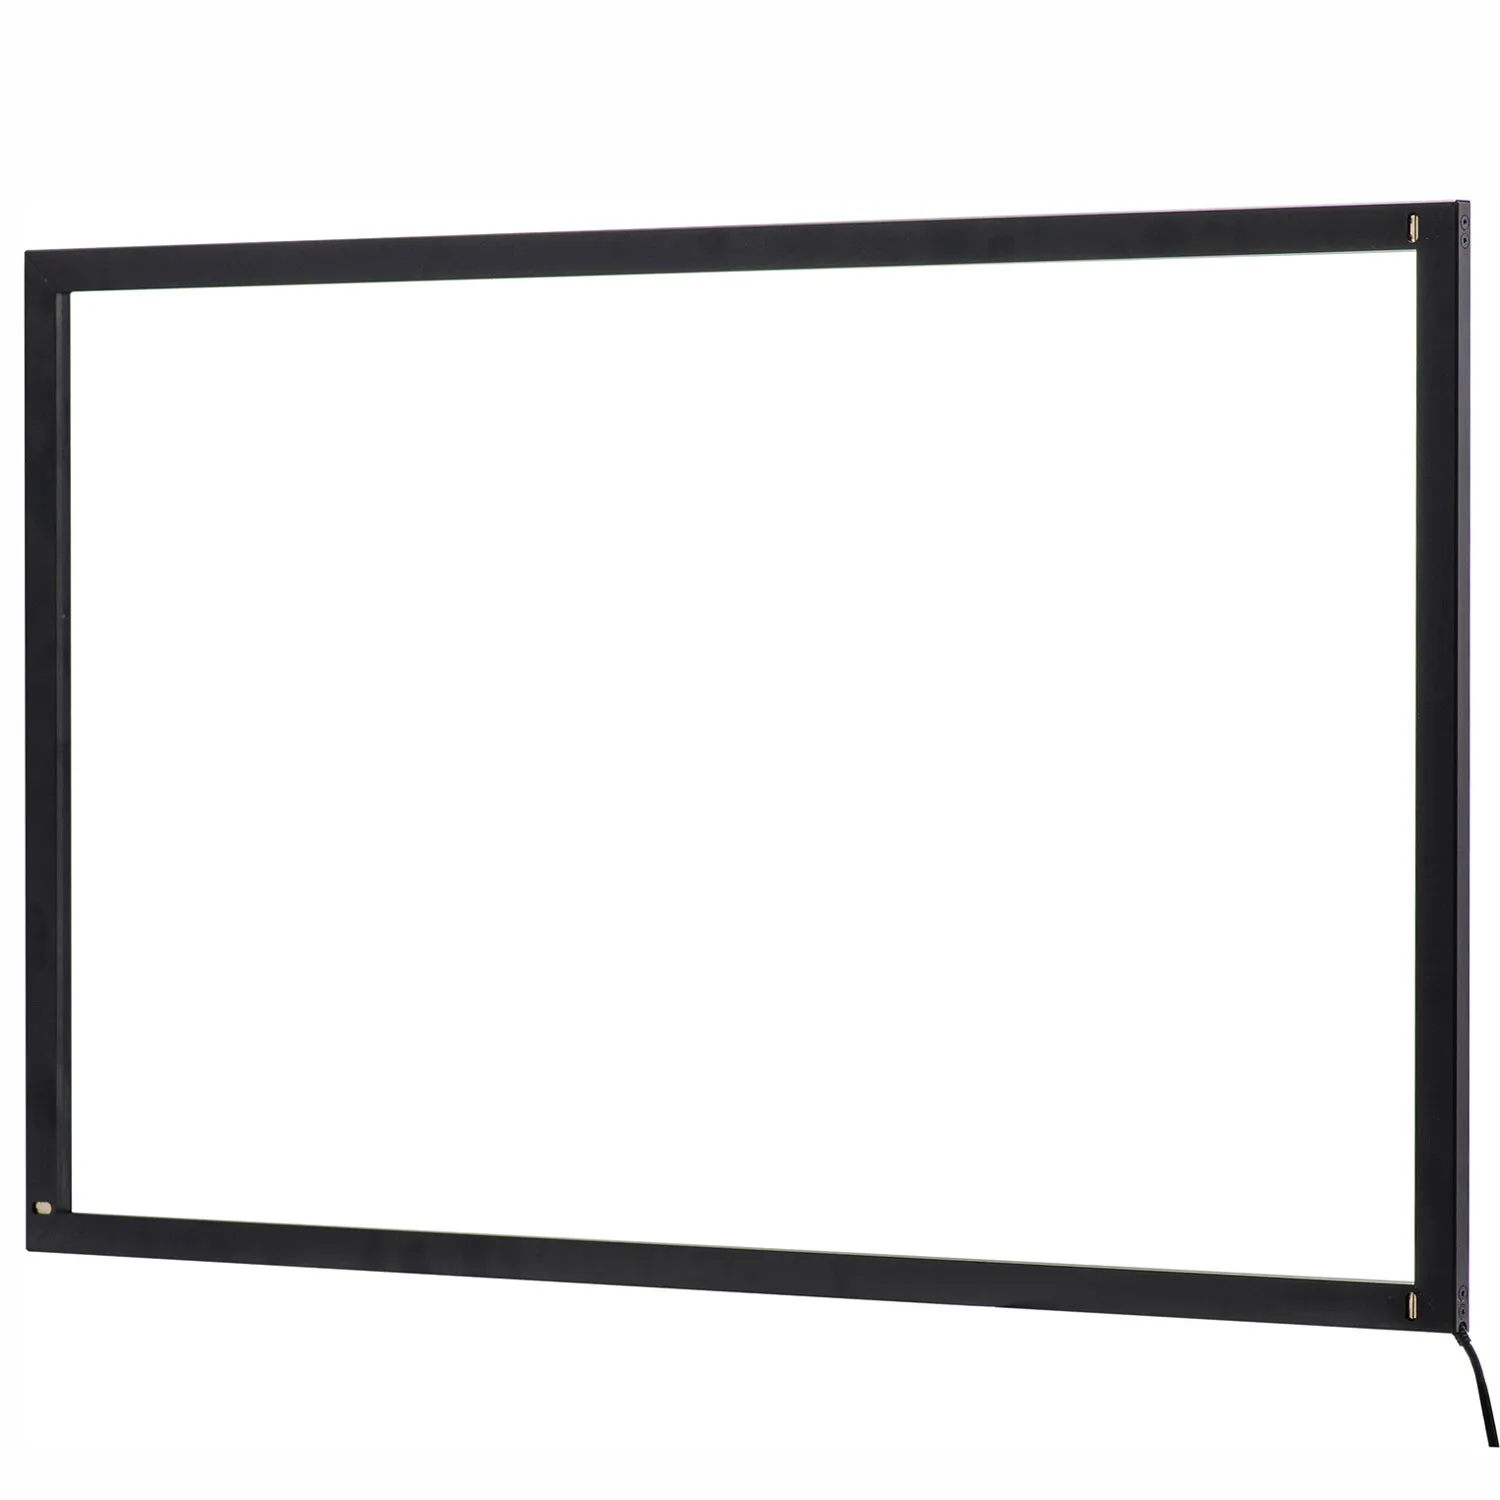 Touch frame Keetouch GmbH 75" KP-750-IP0S001